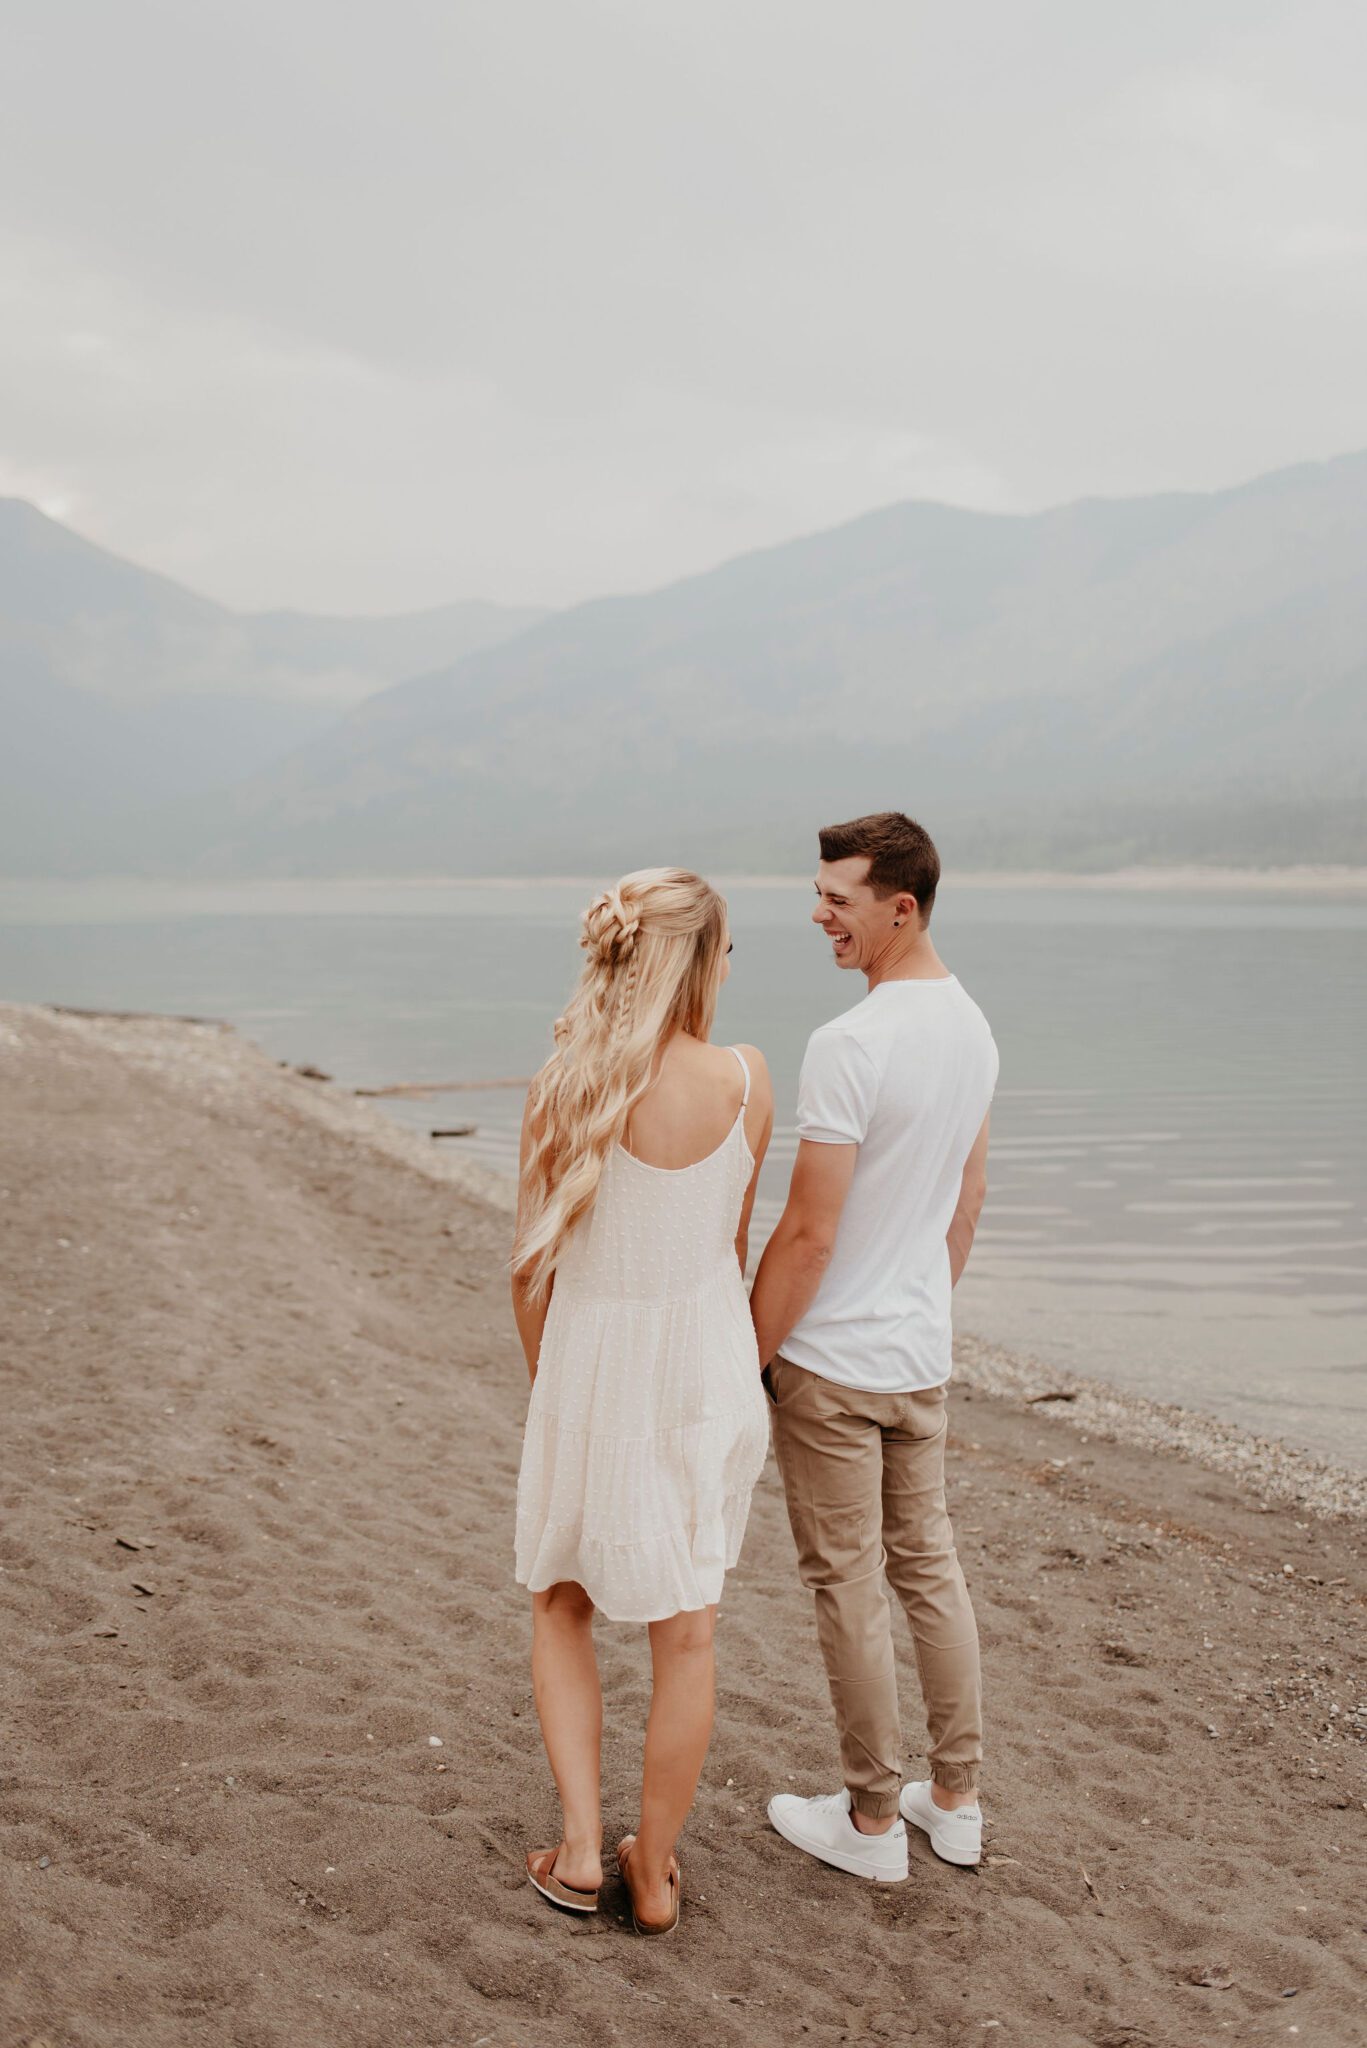 Young couple laughing together on the beach during this fun summer evening photoshoot in the mountains of Alberta.